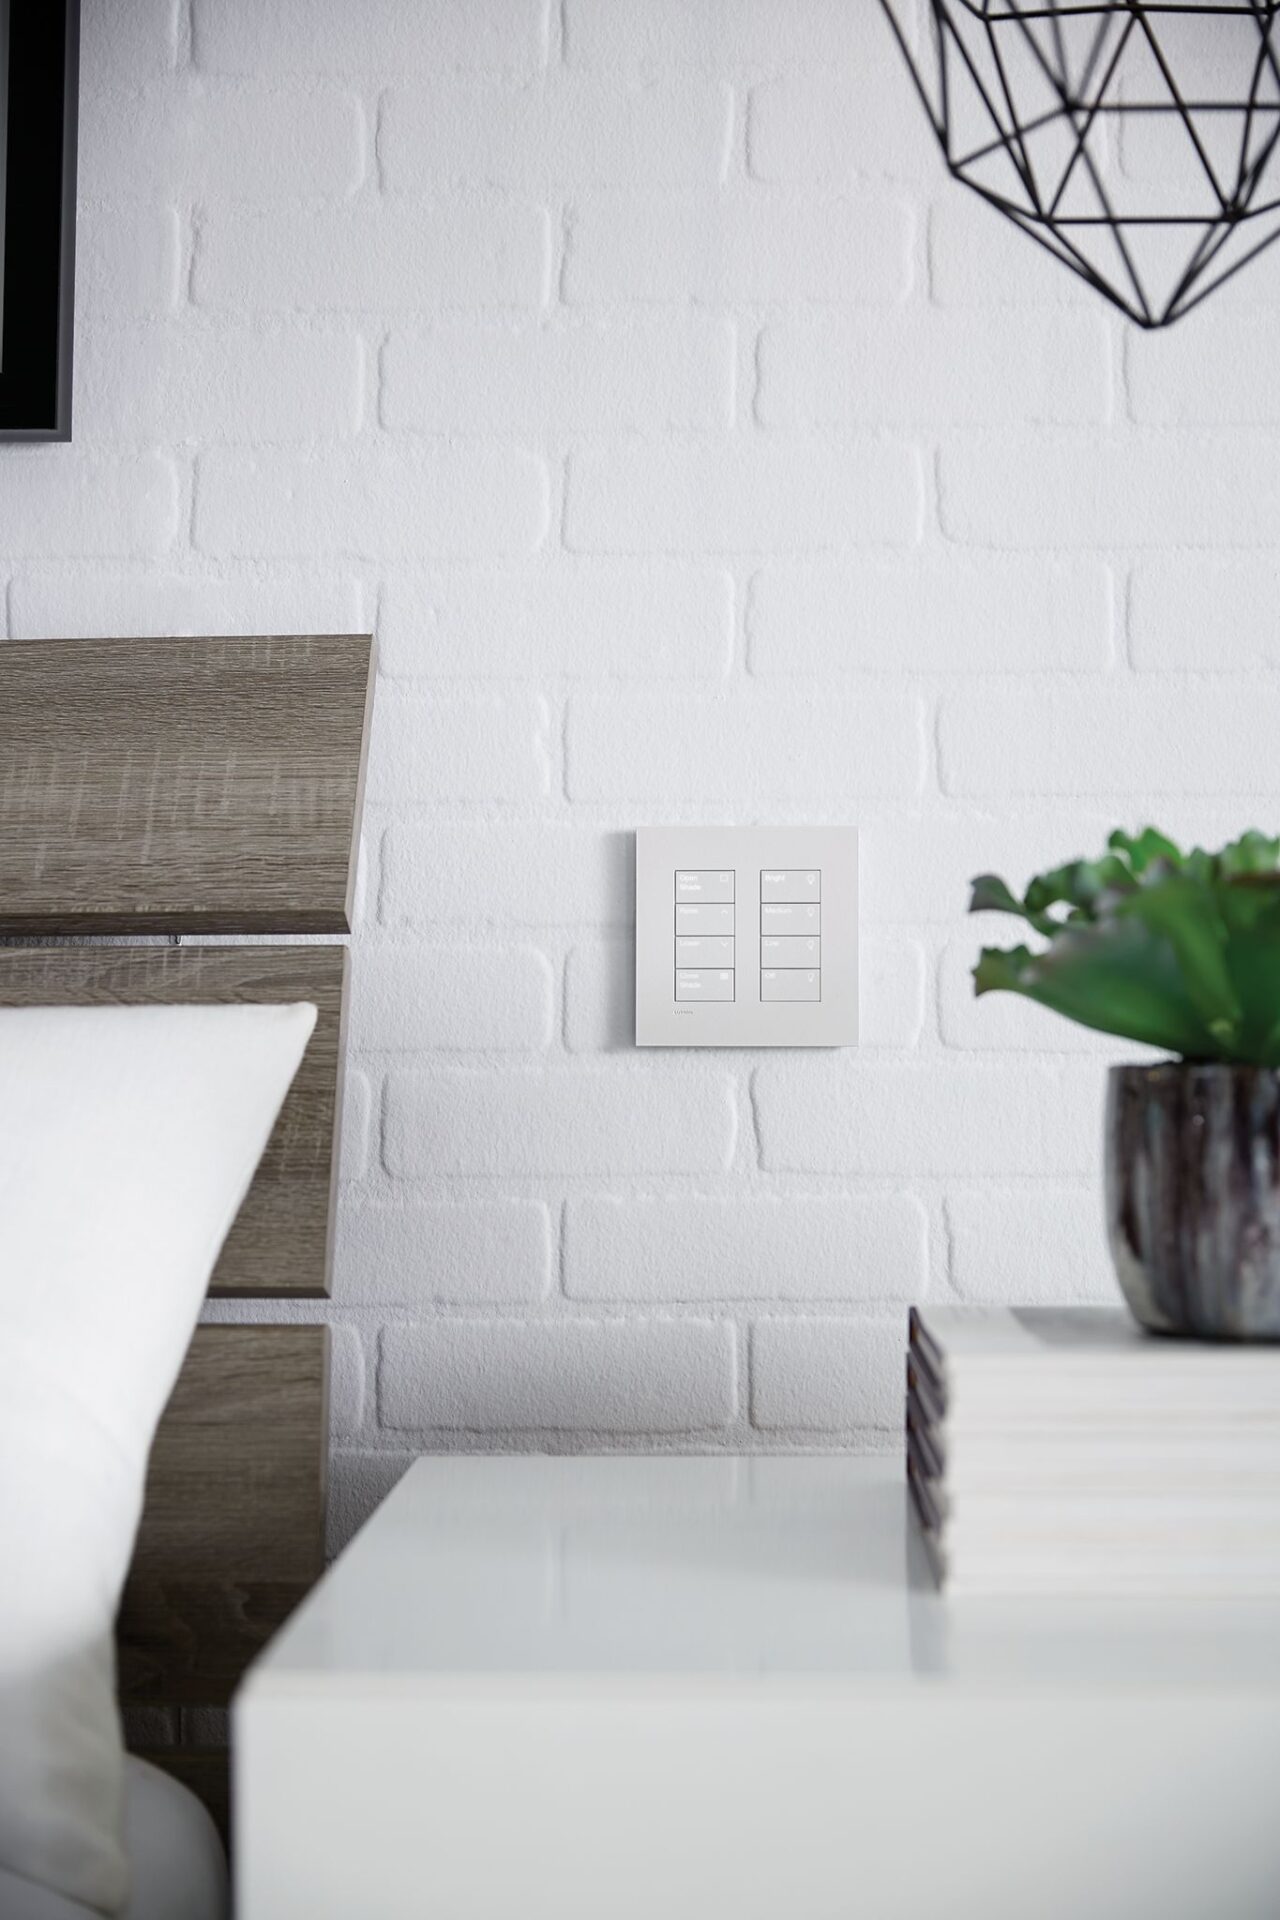 Modern interior with a white brick wall, wooden furniture, a geometric light fixture, light switch plates, a pillow, and a potted plant on a nightstand.